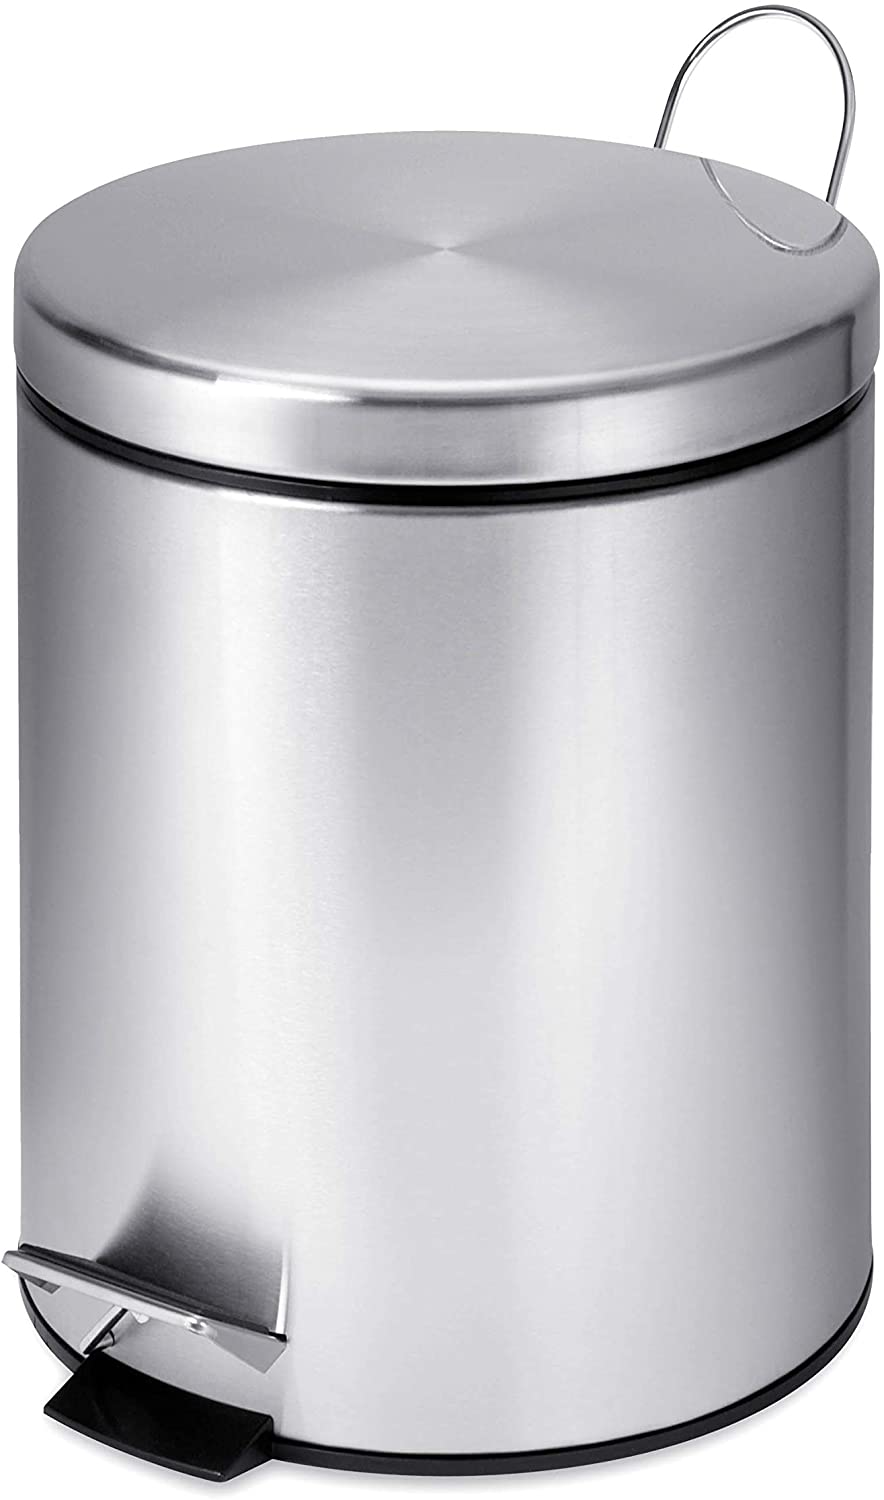  Mini Stainless Steel Trash Can